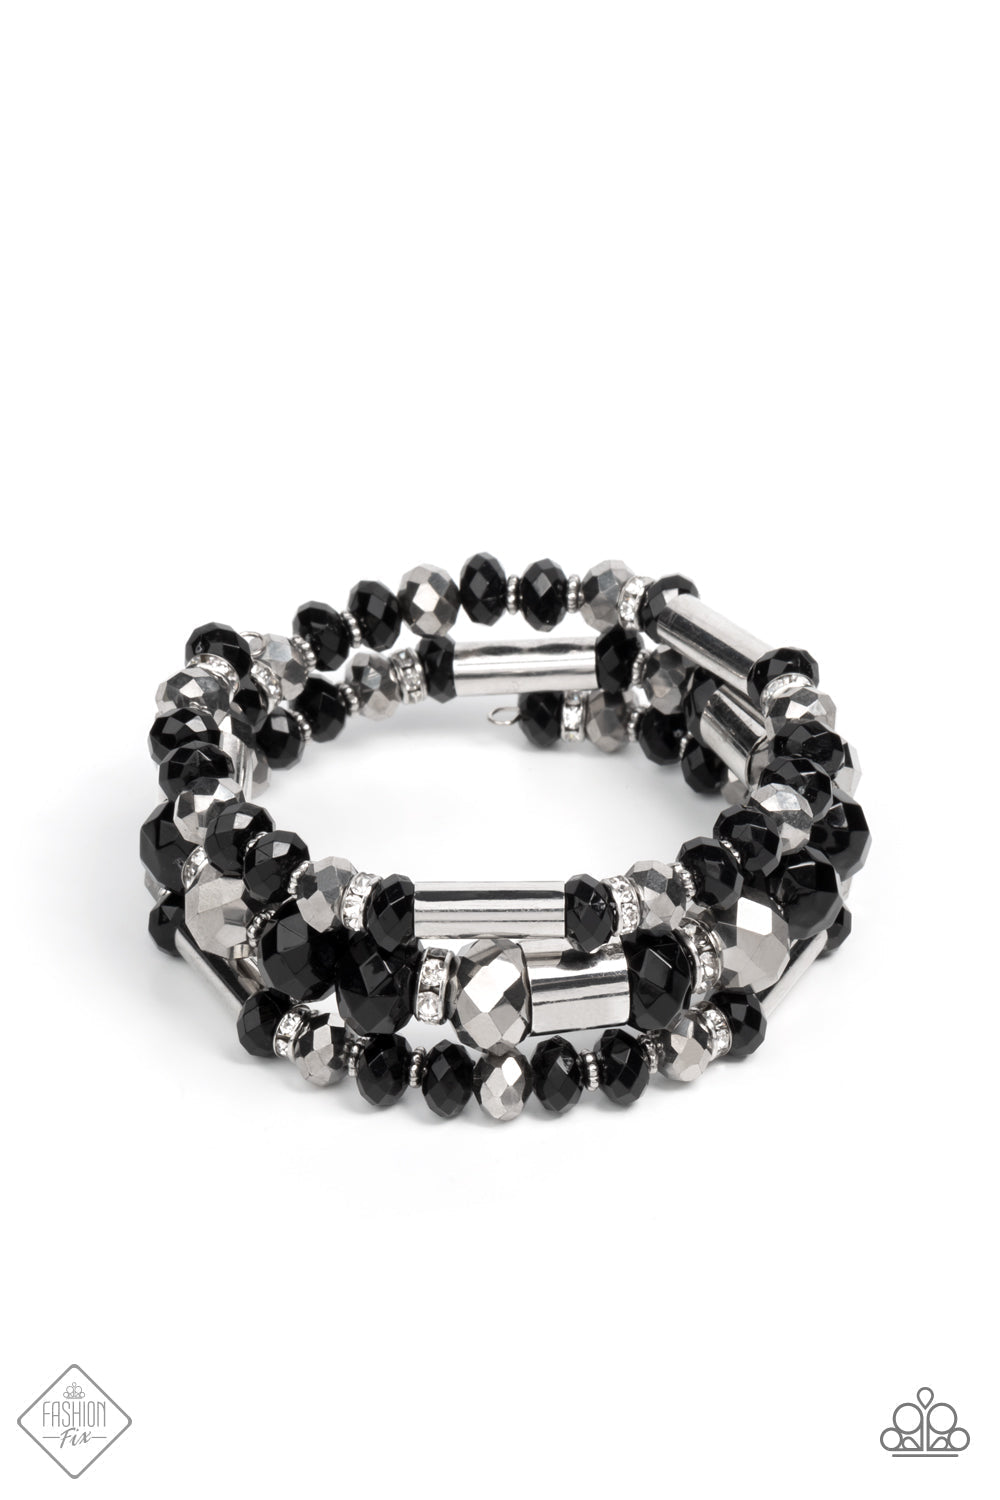 Dynamic Dazzle - Black and Silver - Infinity Wrap Bracelet - Paparazzi Accessories - Stacks of black and silver faceted beads, interspersed with silver cylindrical accents and rhinestone-encrusted beads, are threaded along an infinity wrap-style bracelet making an intensely dynamic statement around the wrist.  Sold as one individual bracelet.